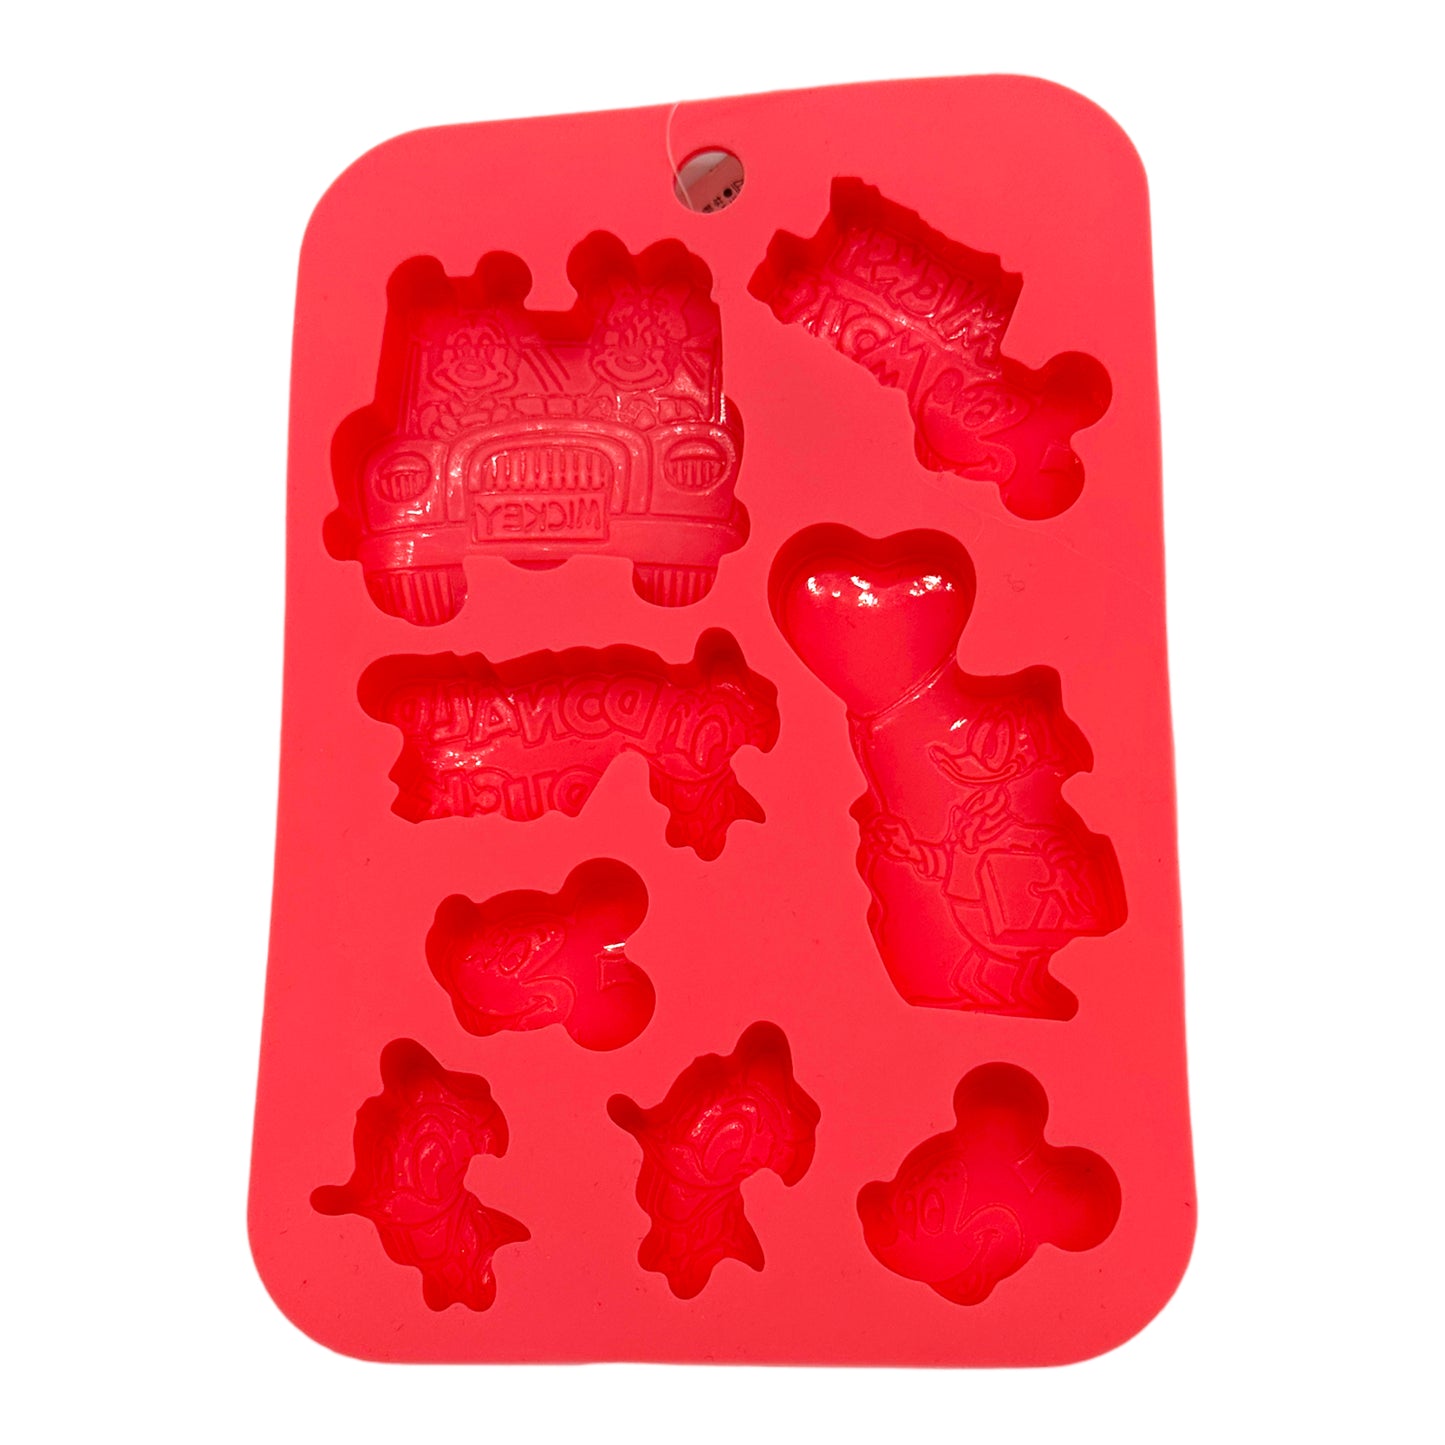 Mickey and Donald Small Silicone Chocolate Mold